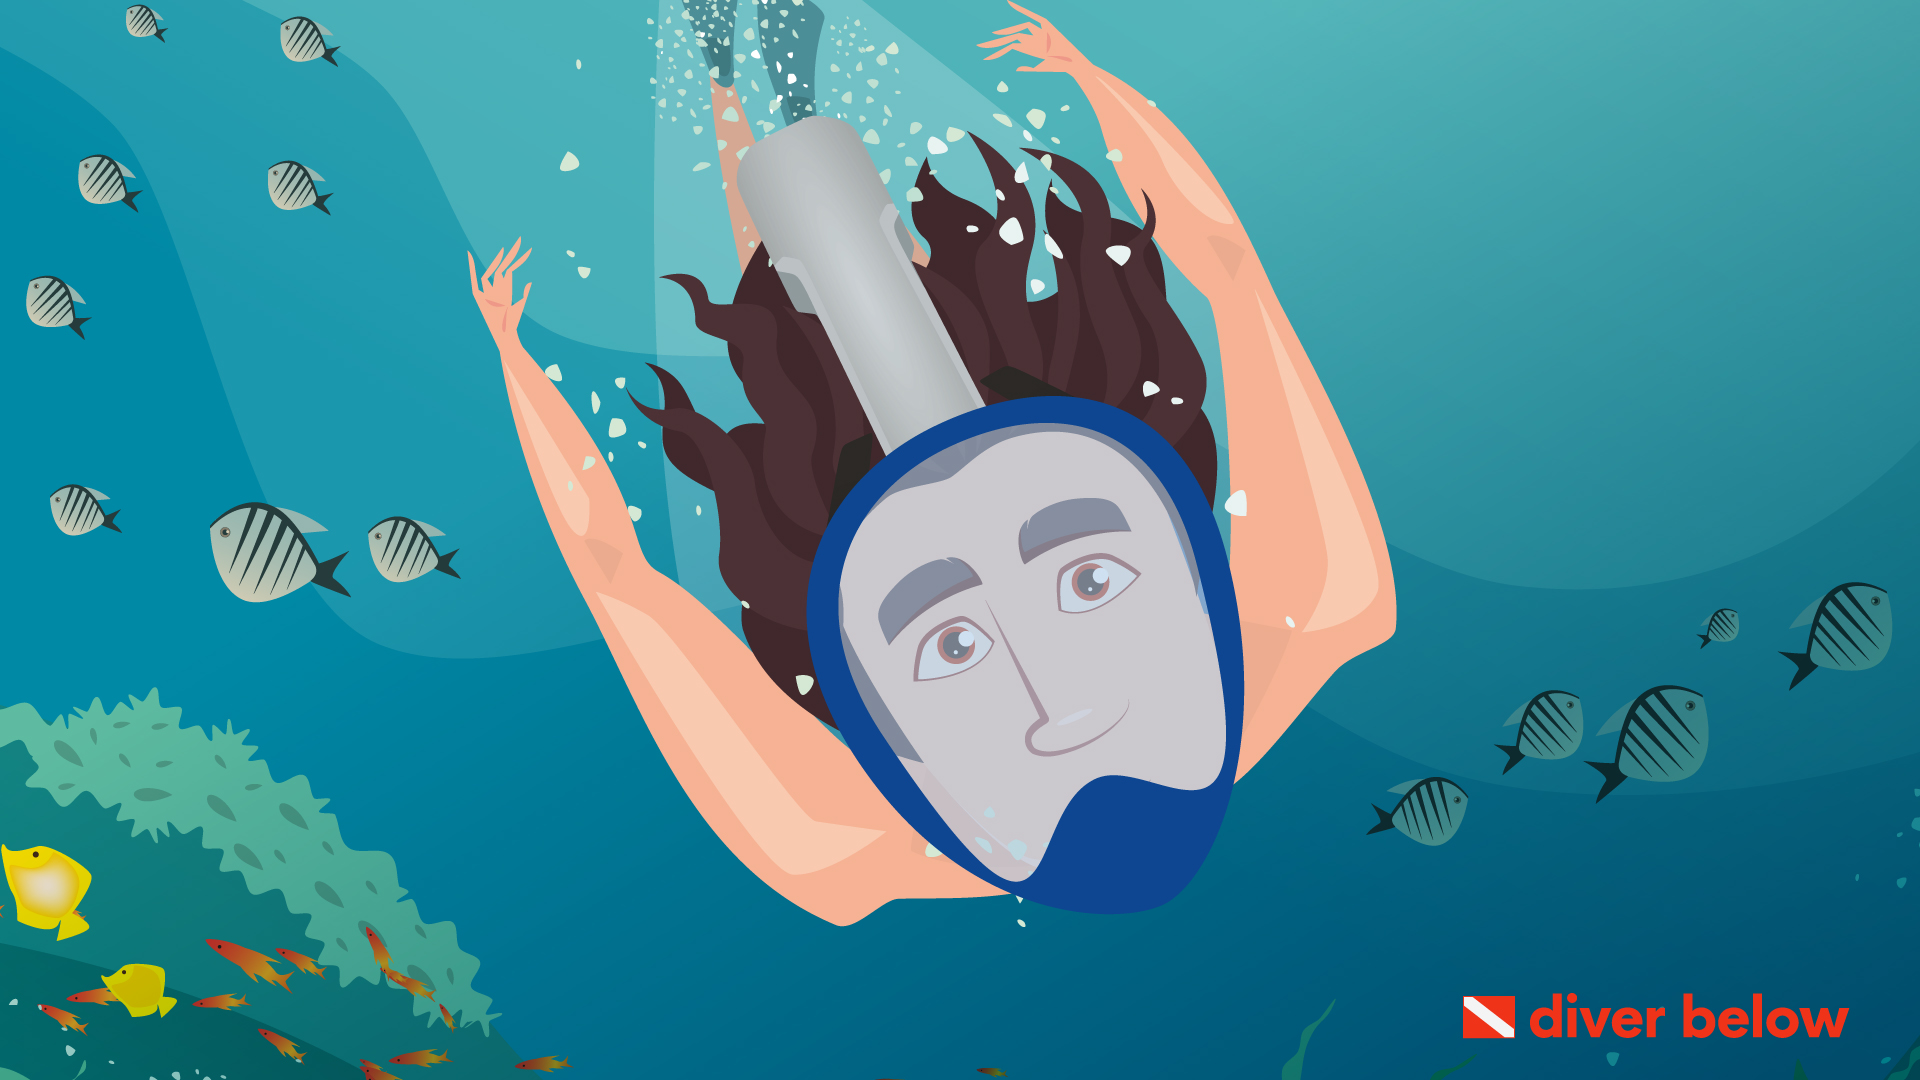 vector graphic showing a woman wearing a full face snorkel mask and snorkeling underwater